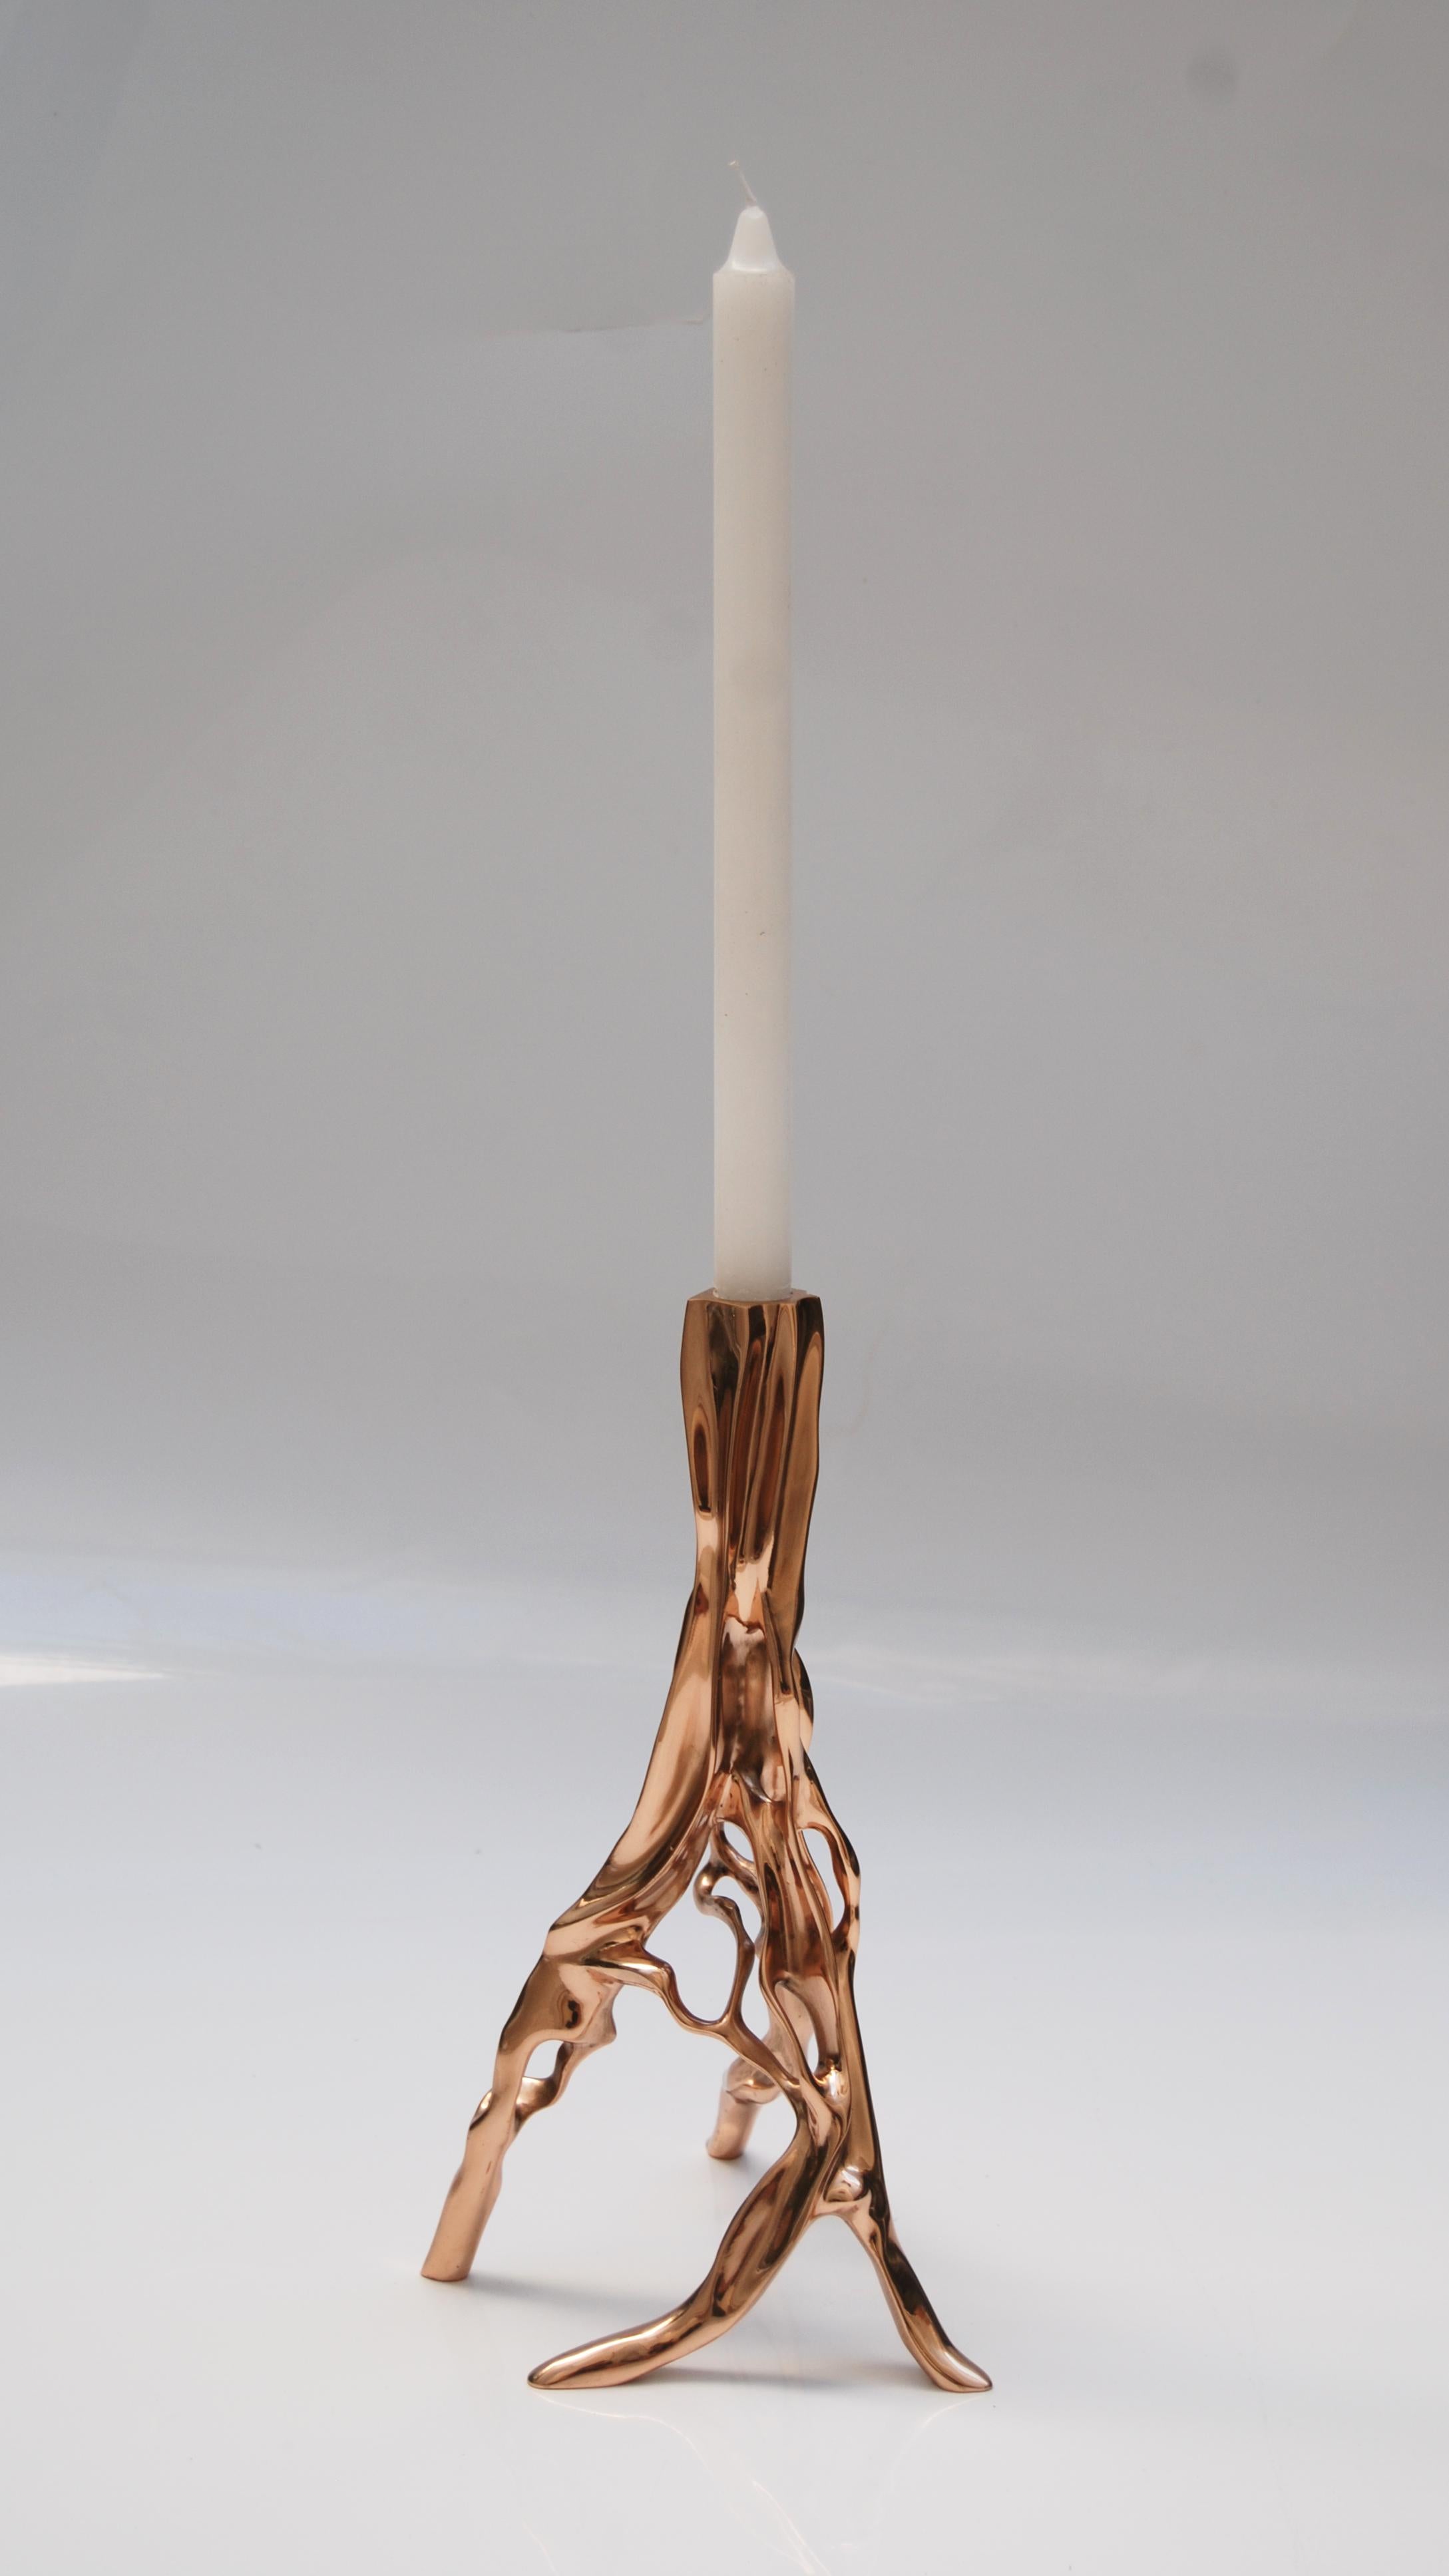 Candlestick in Polished Bronze by FAKASAKA Design
Dimensions: W 20 x D 19 x H 30.5 cm
Materials: Polished bronze.
 